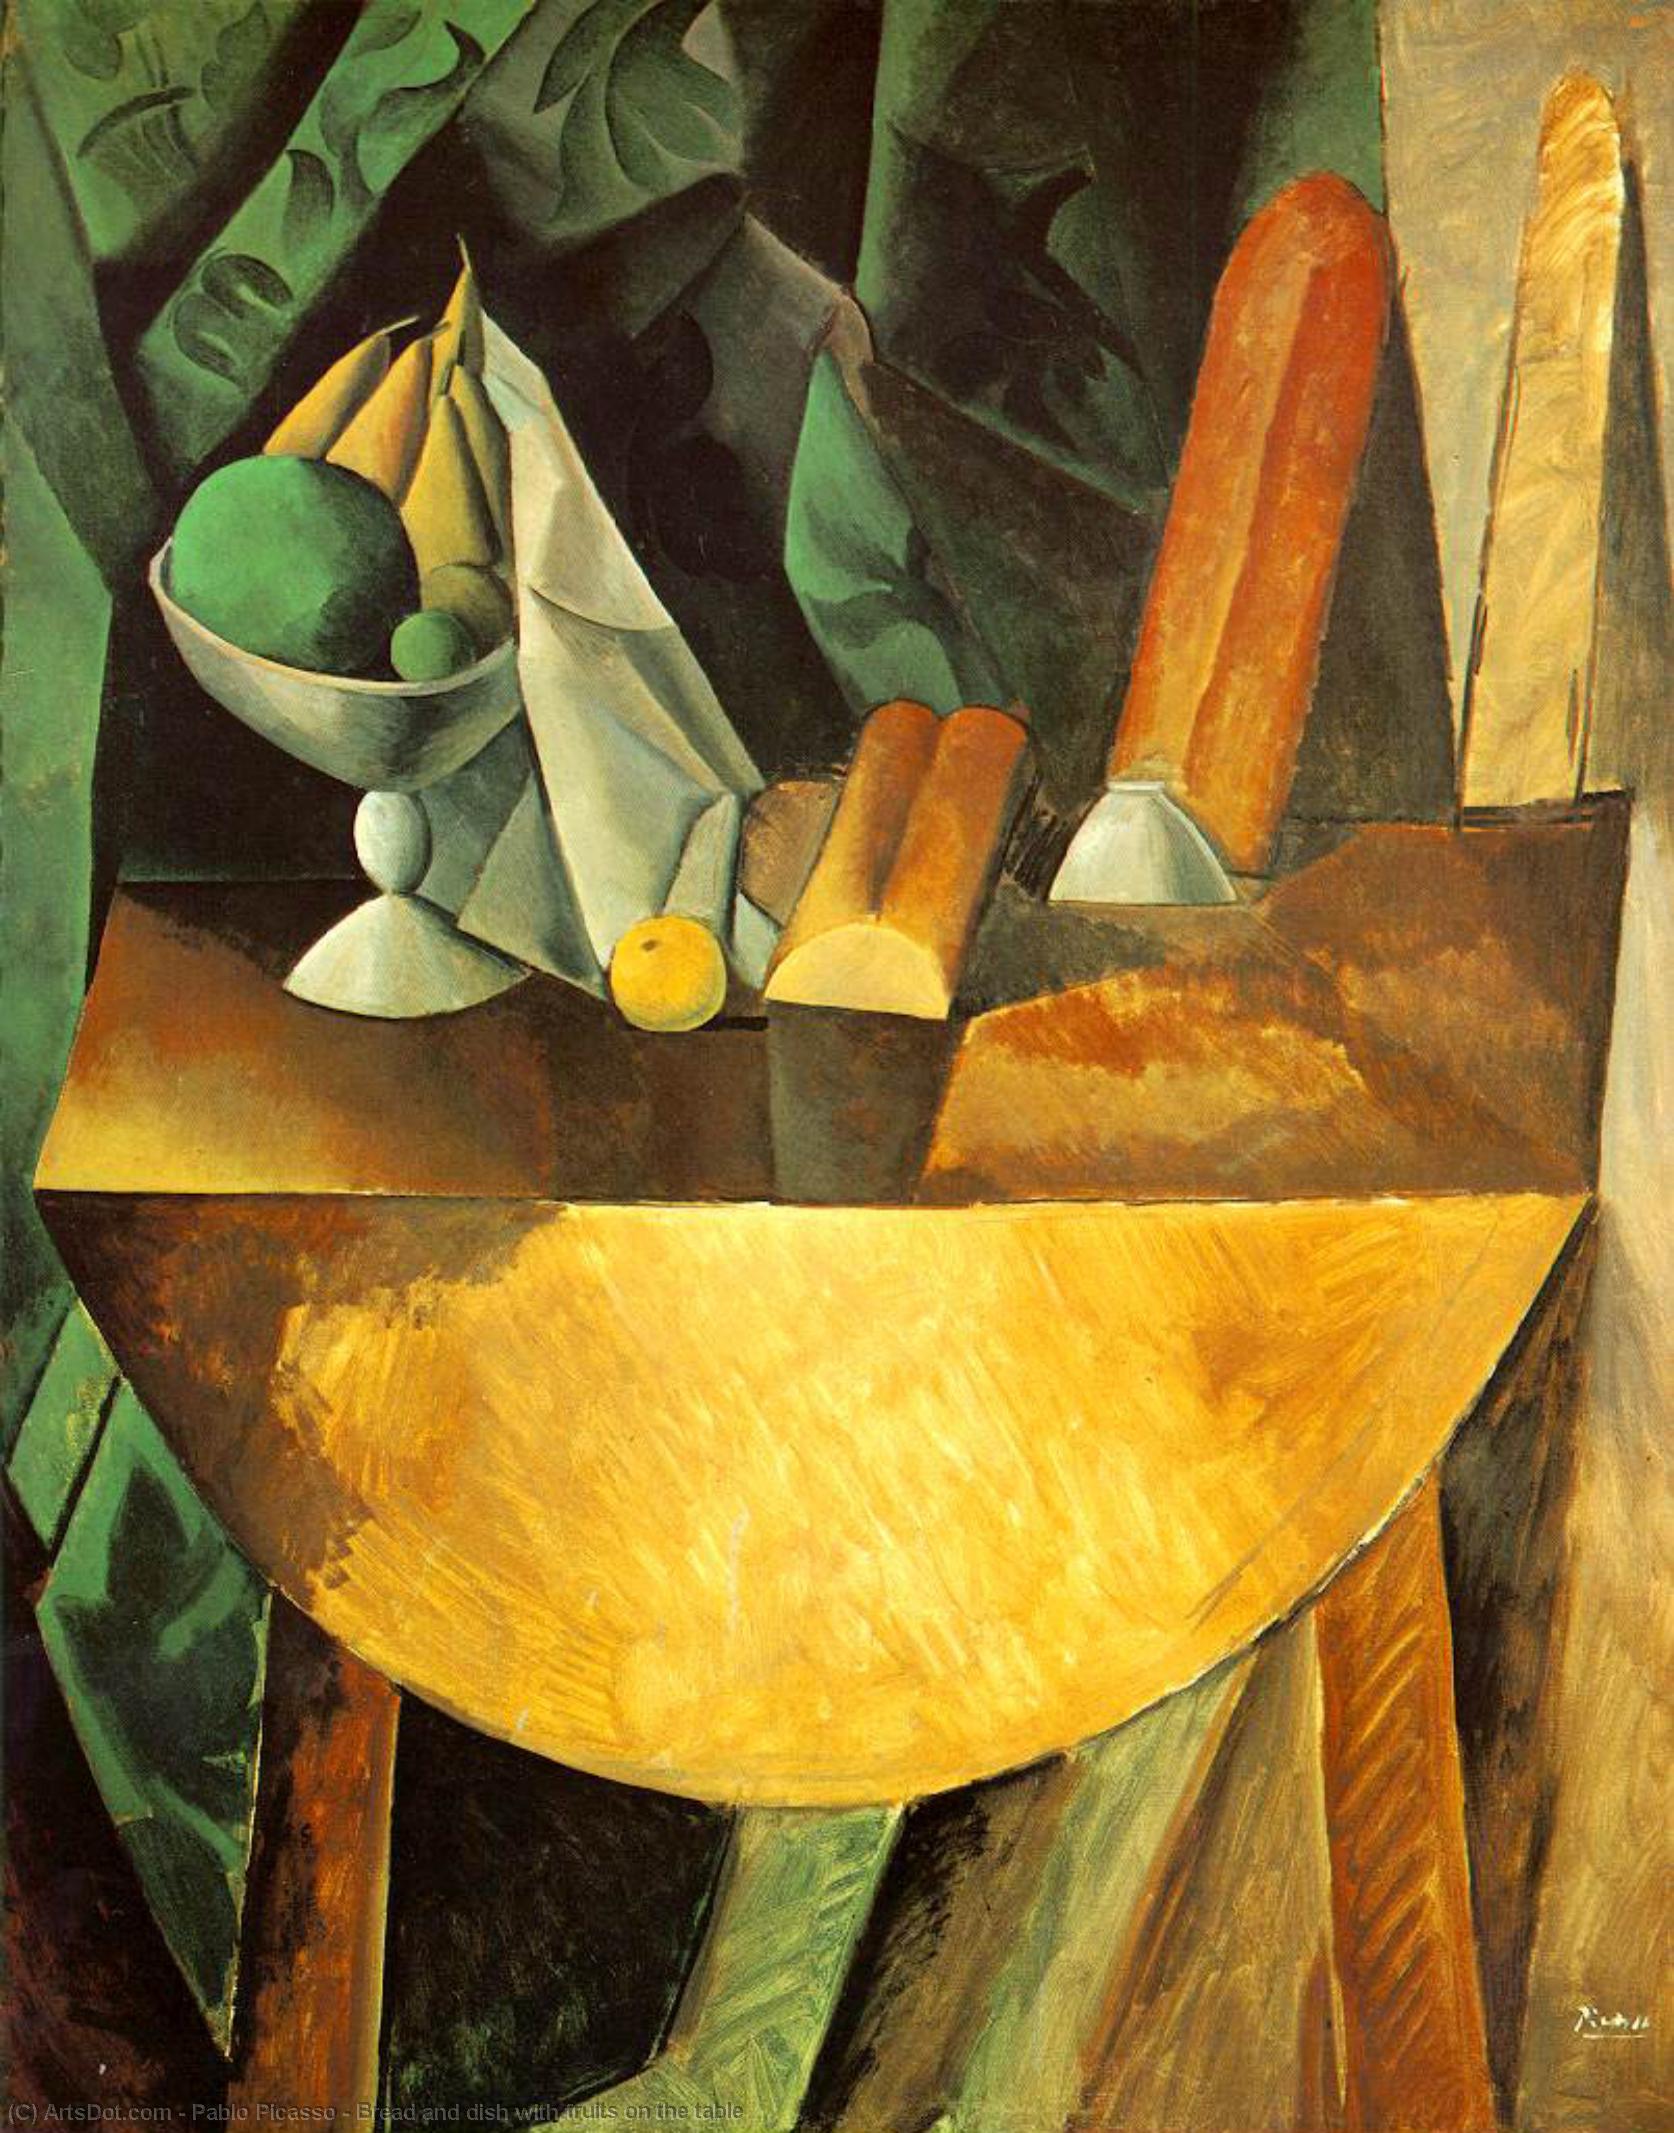 WikiOO.org - Encyclopedia of Fine Arts - Målning, konstverk Pablo Picasso - Bread and dish with fruits on the table